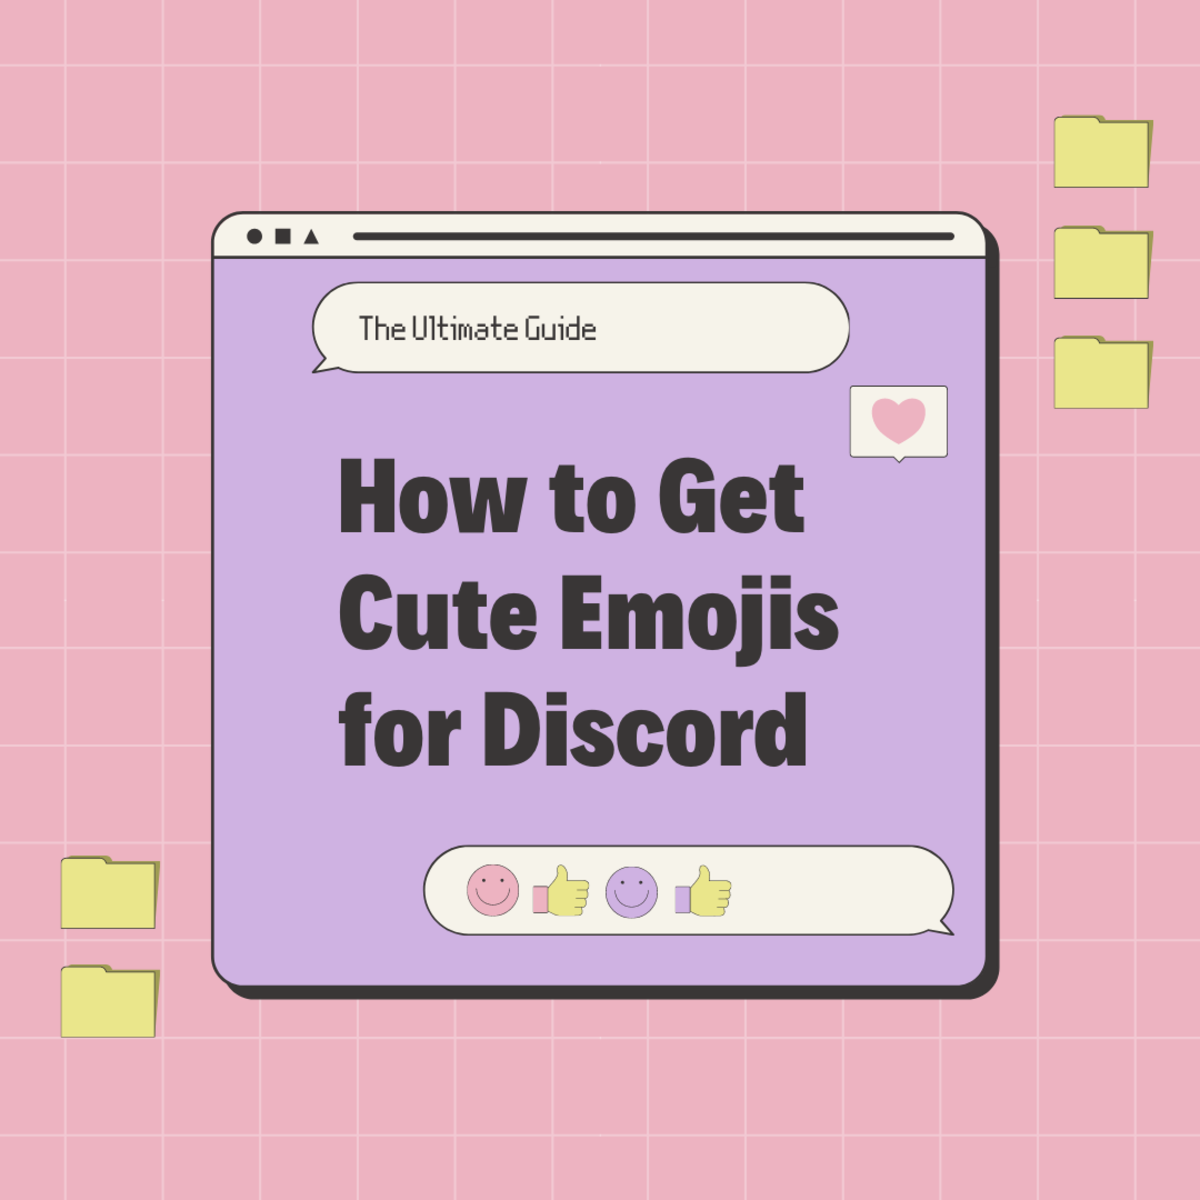 Discover how to get cute emojis for Discord in this in-depth guide!